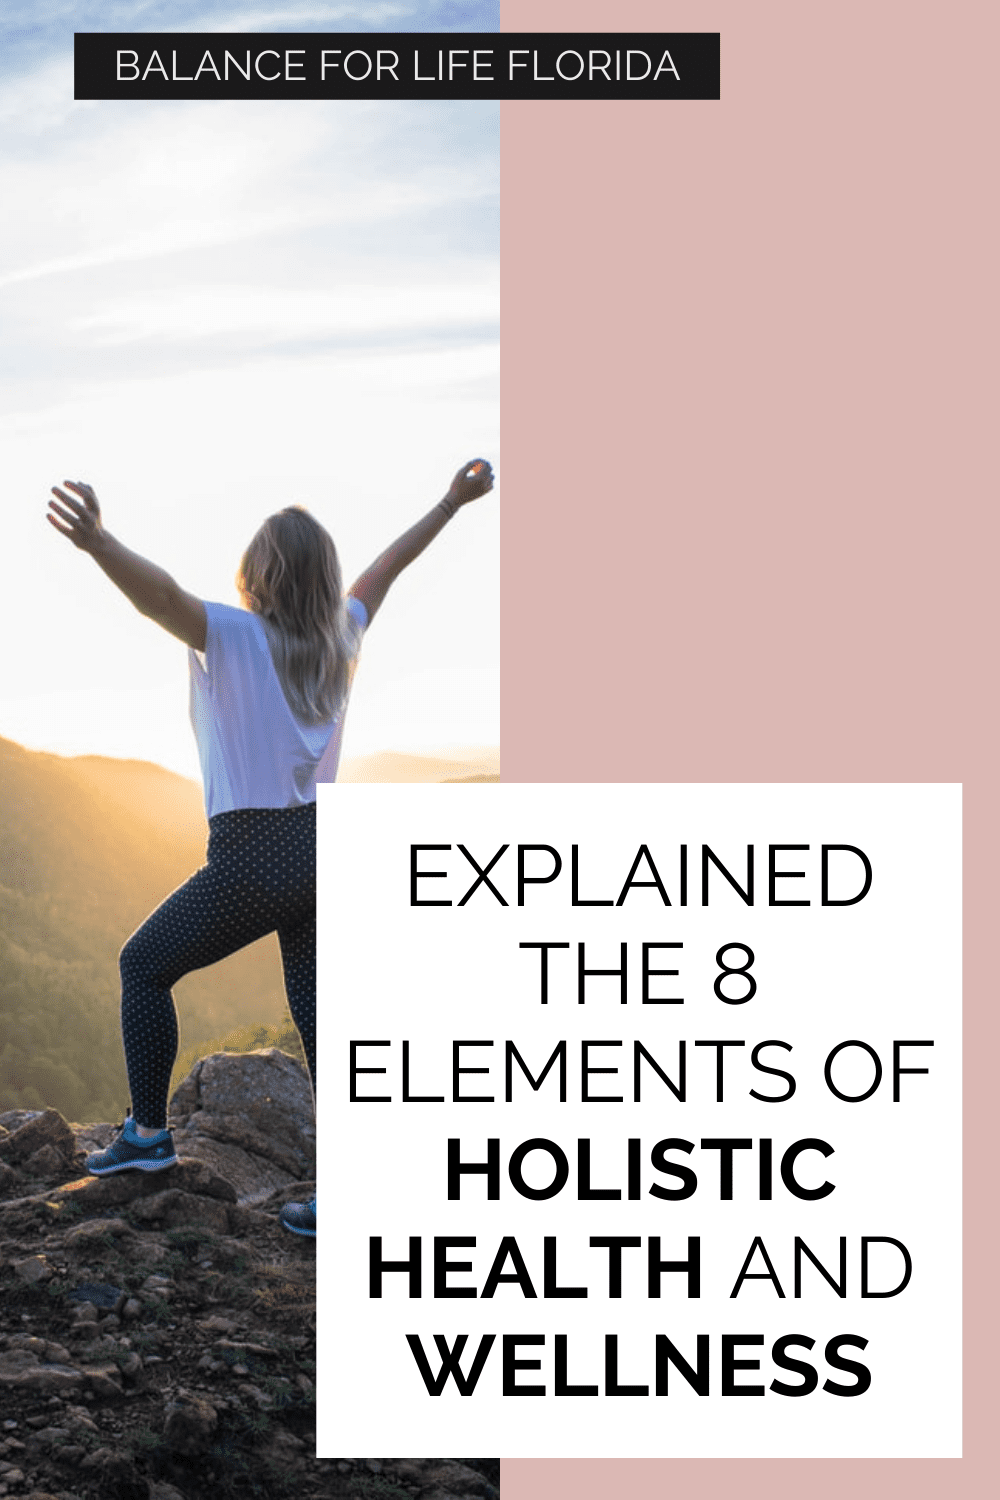 8 elements of holistic health and wellness pinterest image